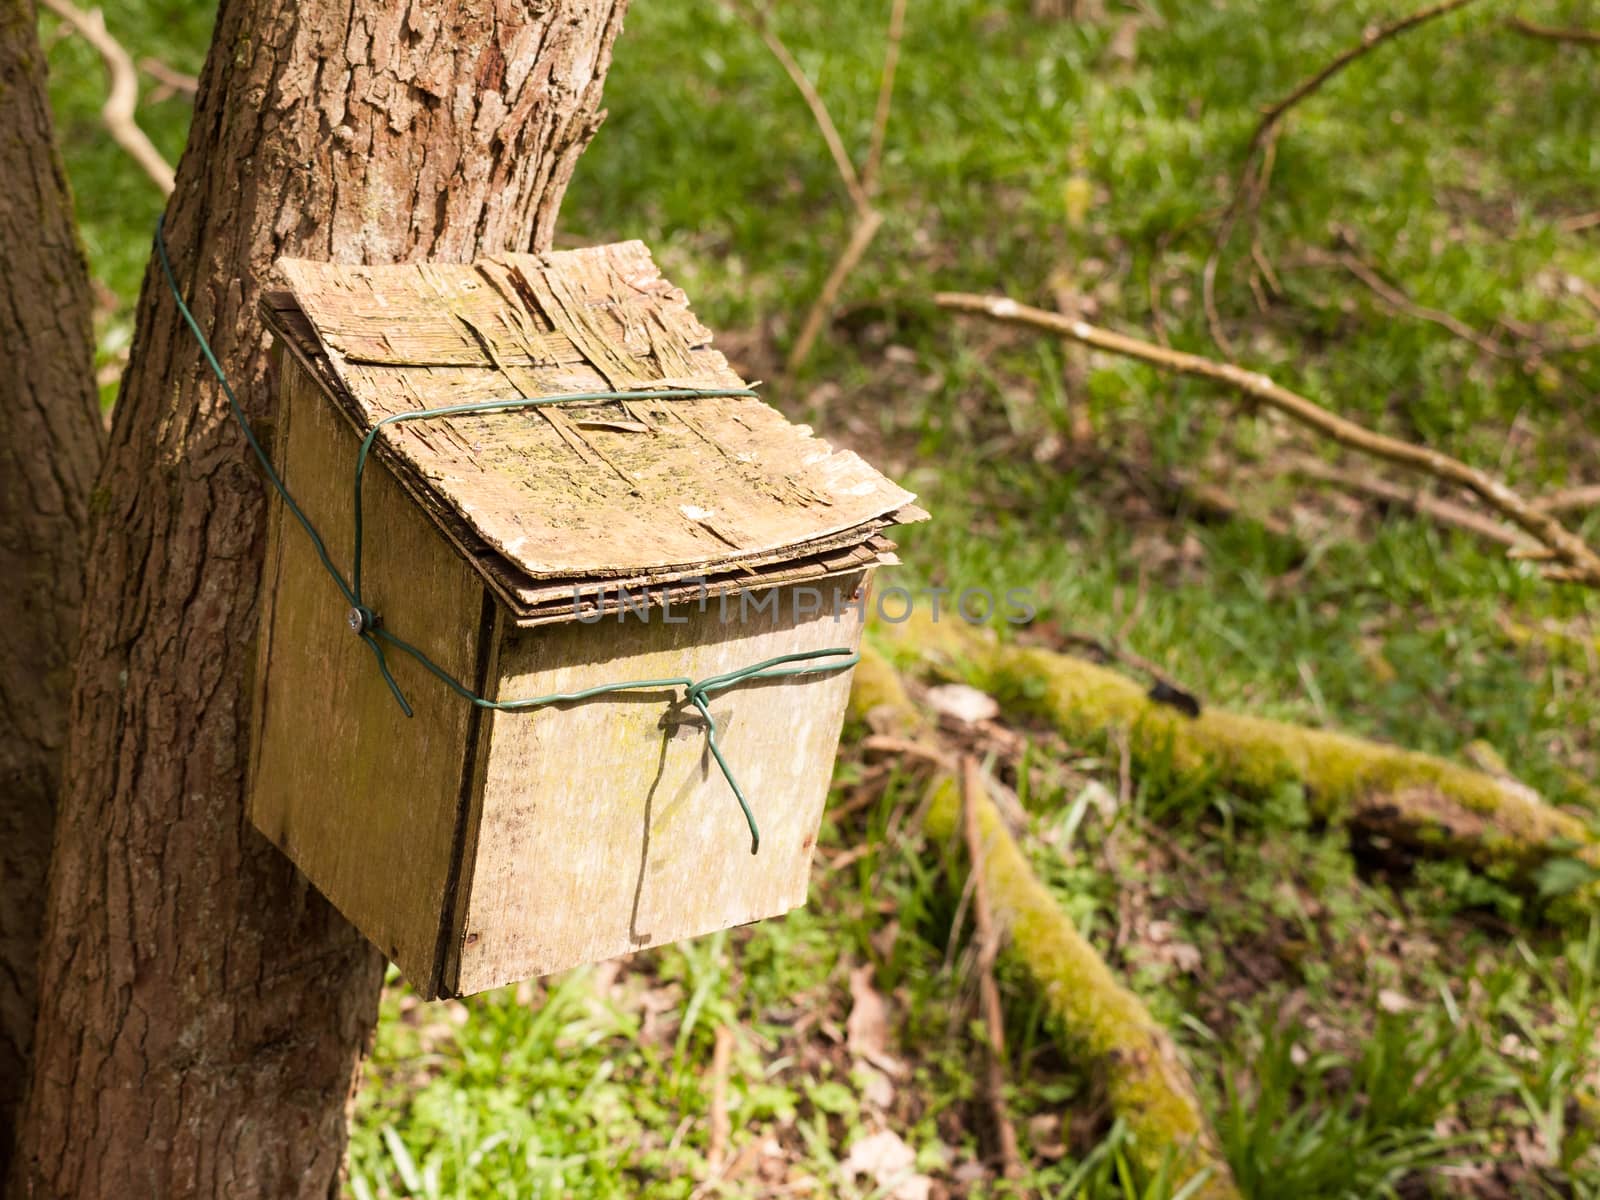 close up of wooden container attached to tree trunk in woodland nature environment by callumrc